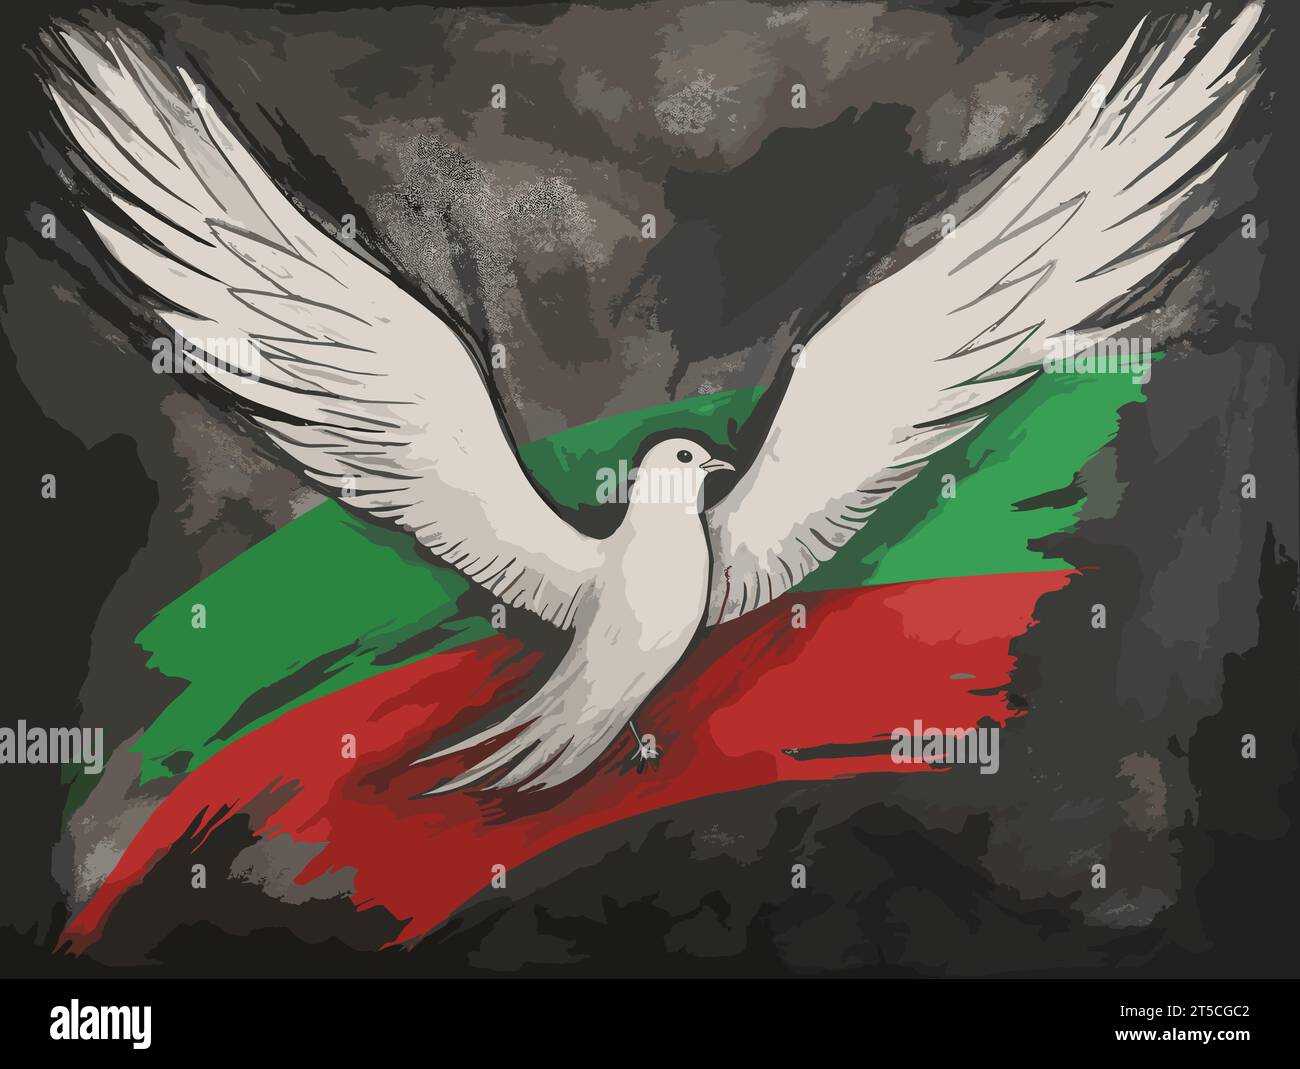 Drawing of palestine flag in peace dove illustration separated, sweeping overdrawn lines. Stock Vector